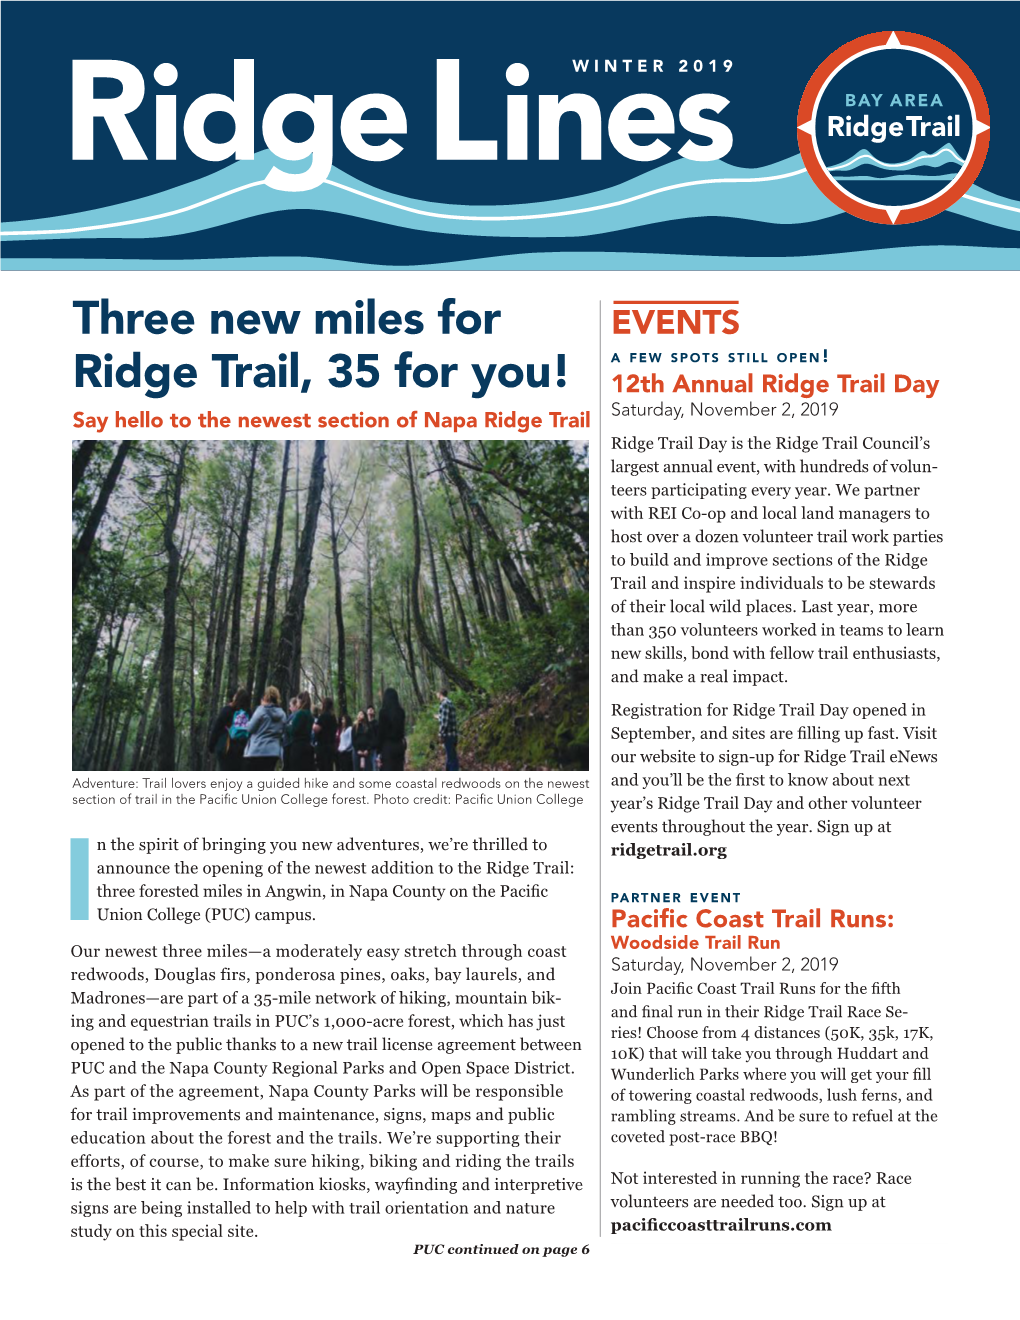 Three New Miles for Ridge Trail, 35 for You!